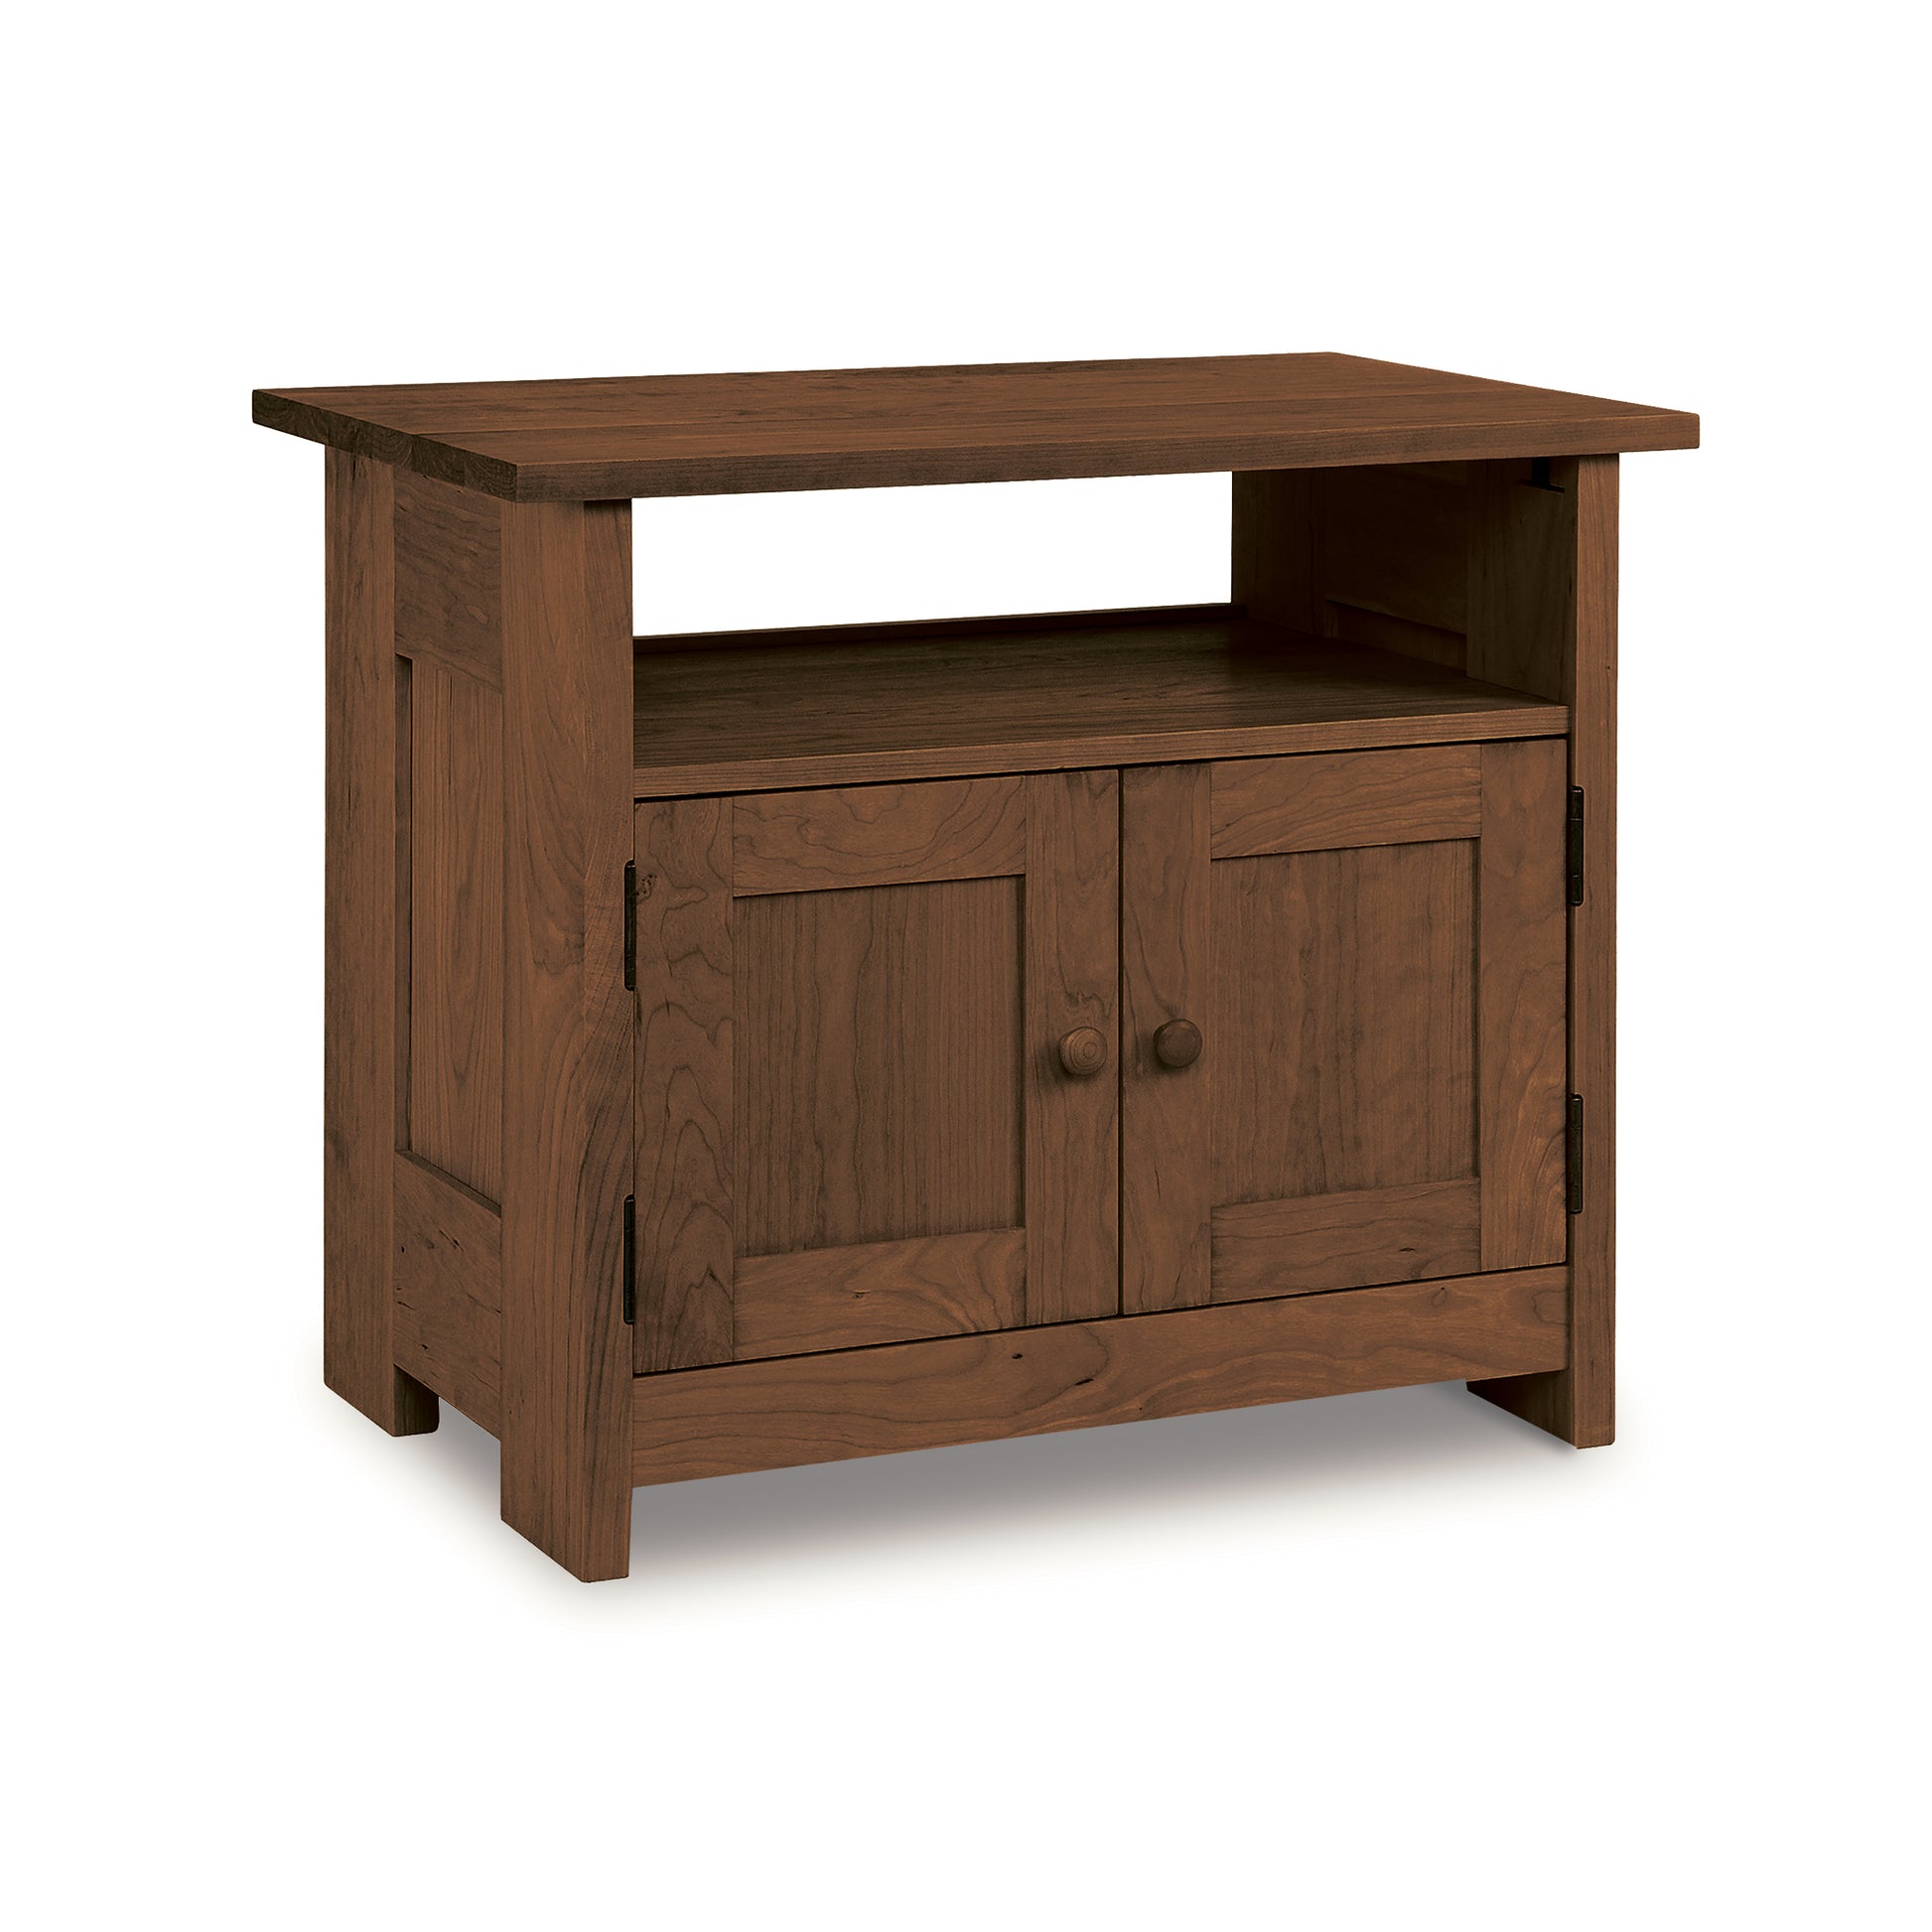 The Vermont Furniture Designs Homestead Small TV Stand is a high-end, handcrafted piece of solid wood furniture featuring two doors.